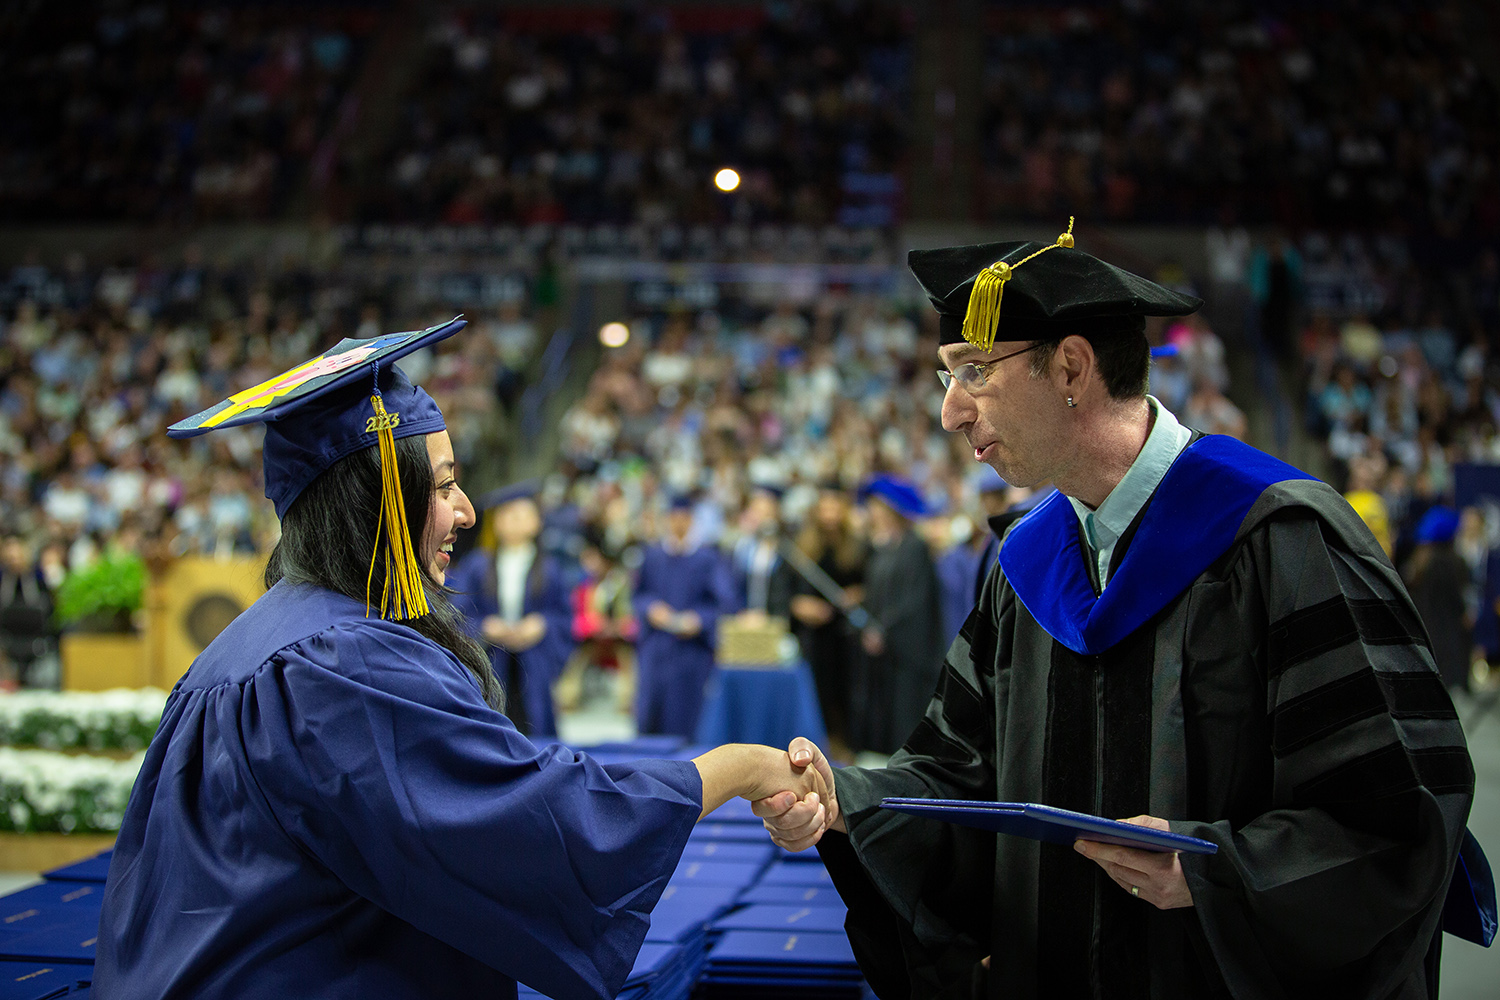 Ofer Harel shakes a graduate's hand during commencement.